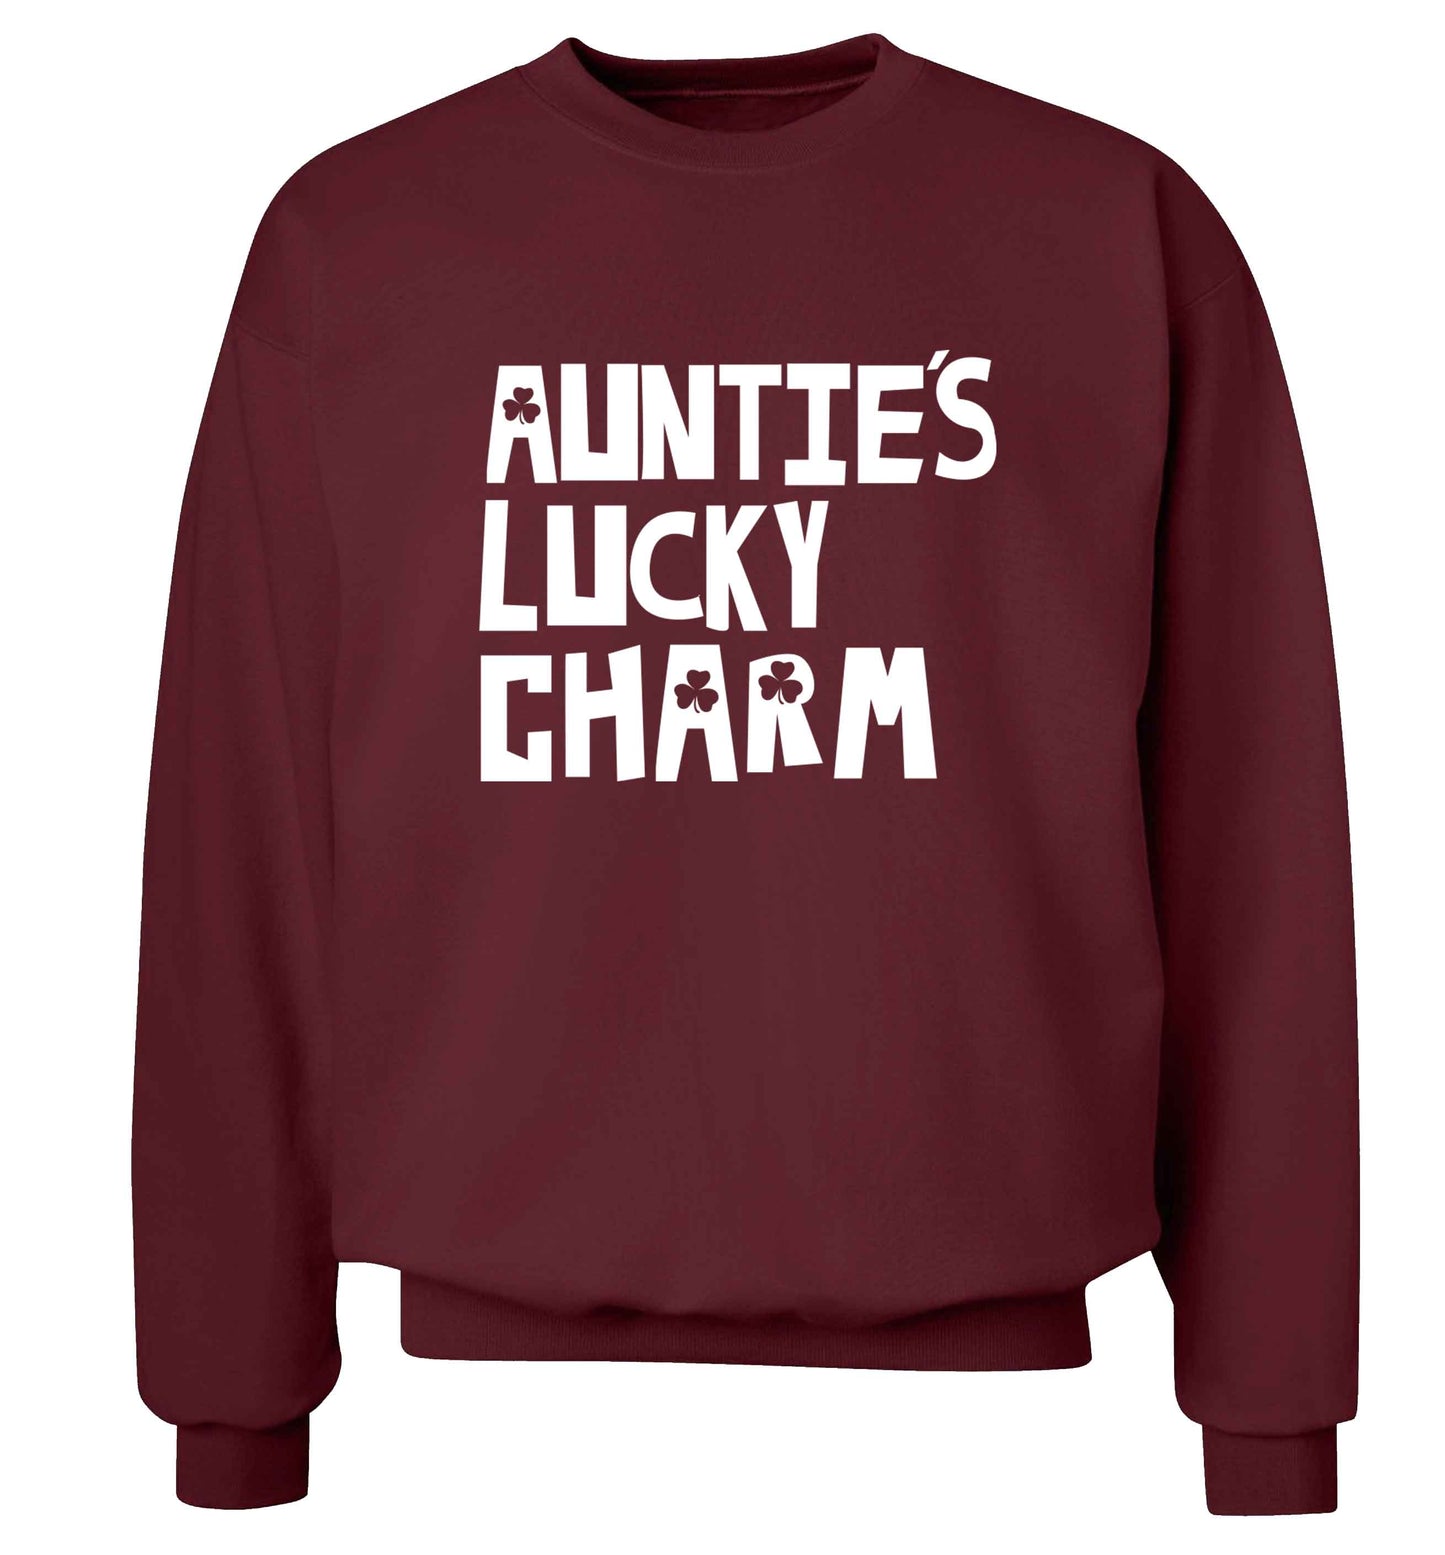 Auntie's lucky charm adult's unisex maroon sweater 2XL